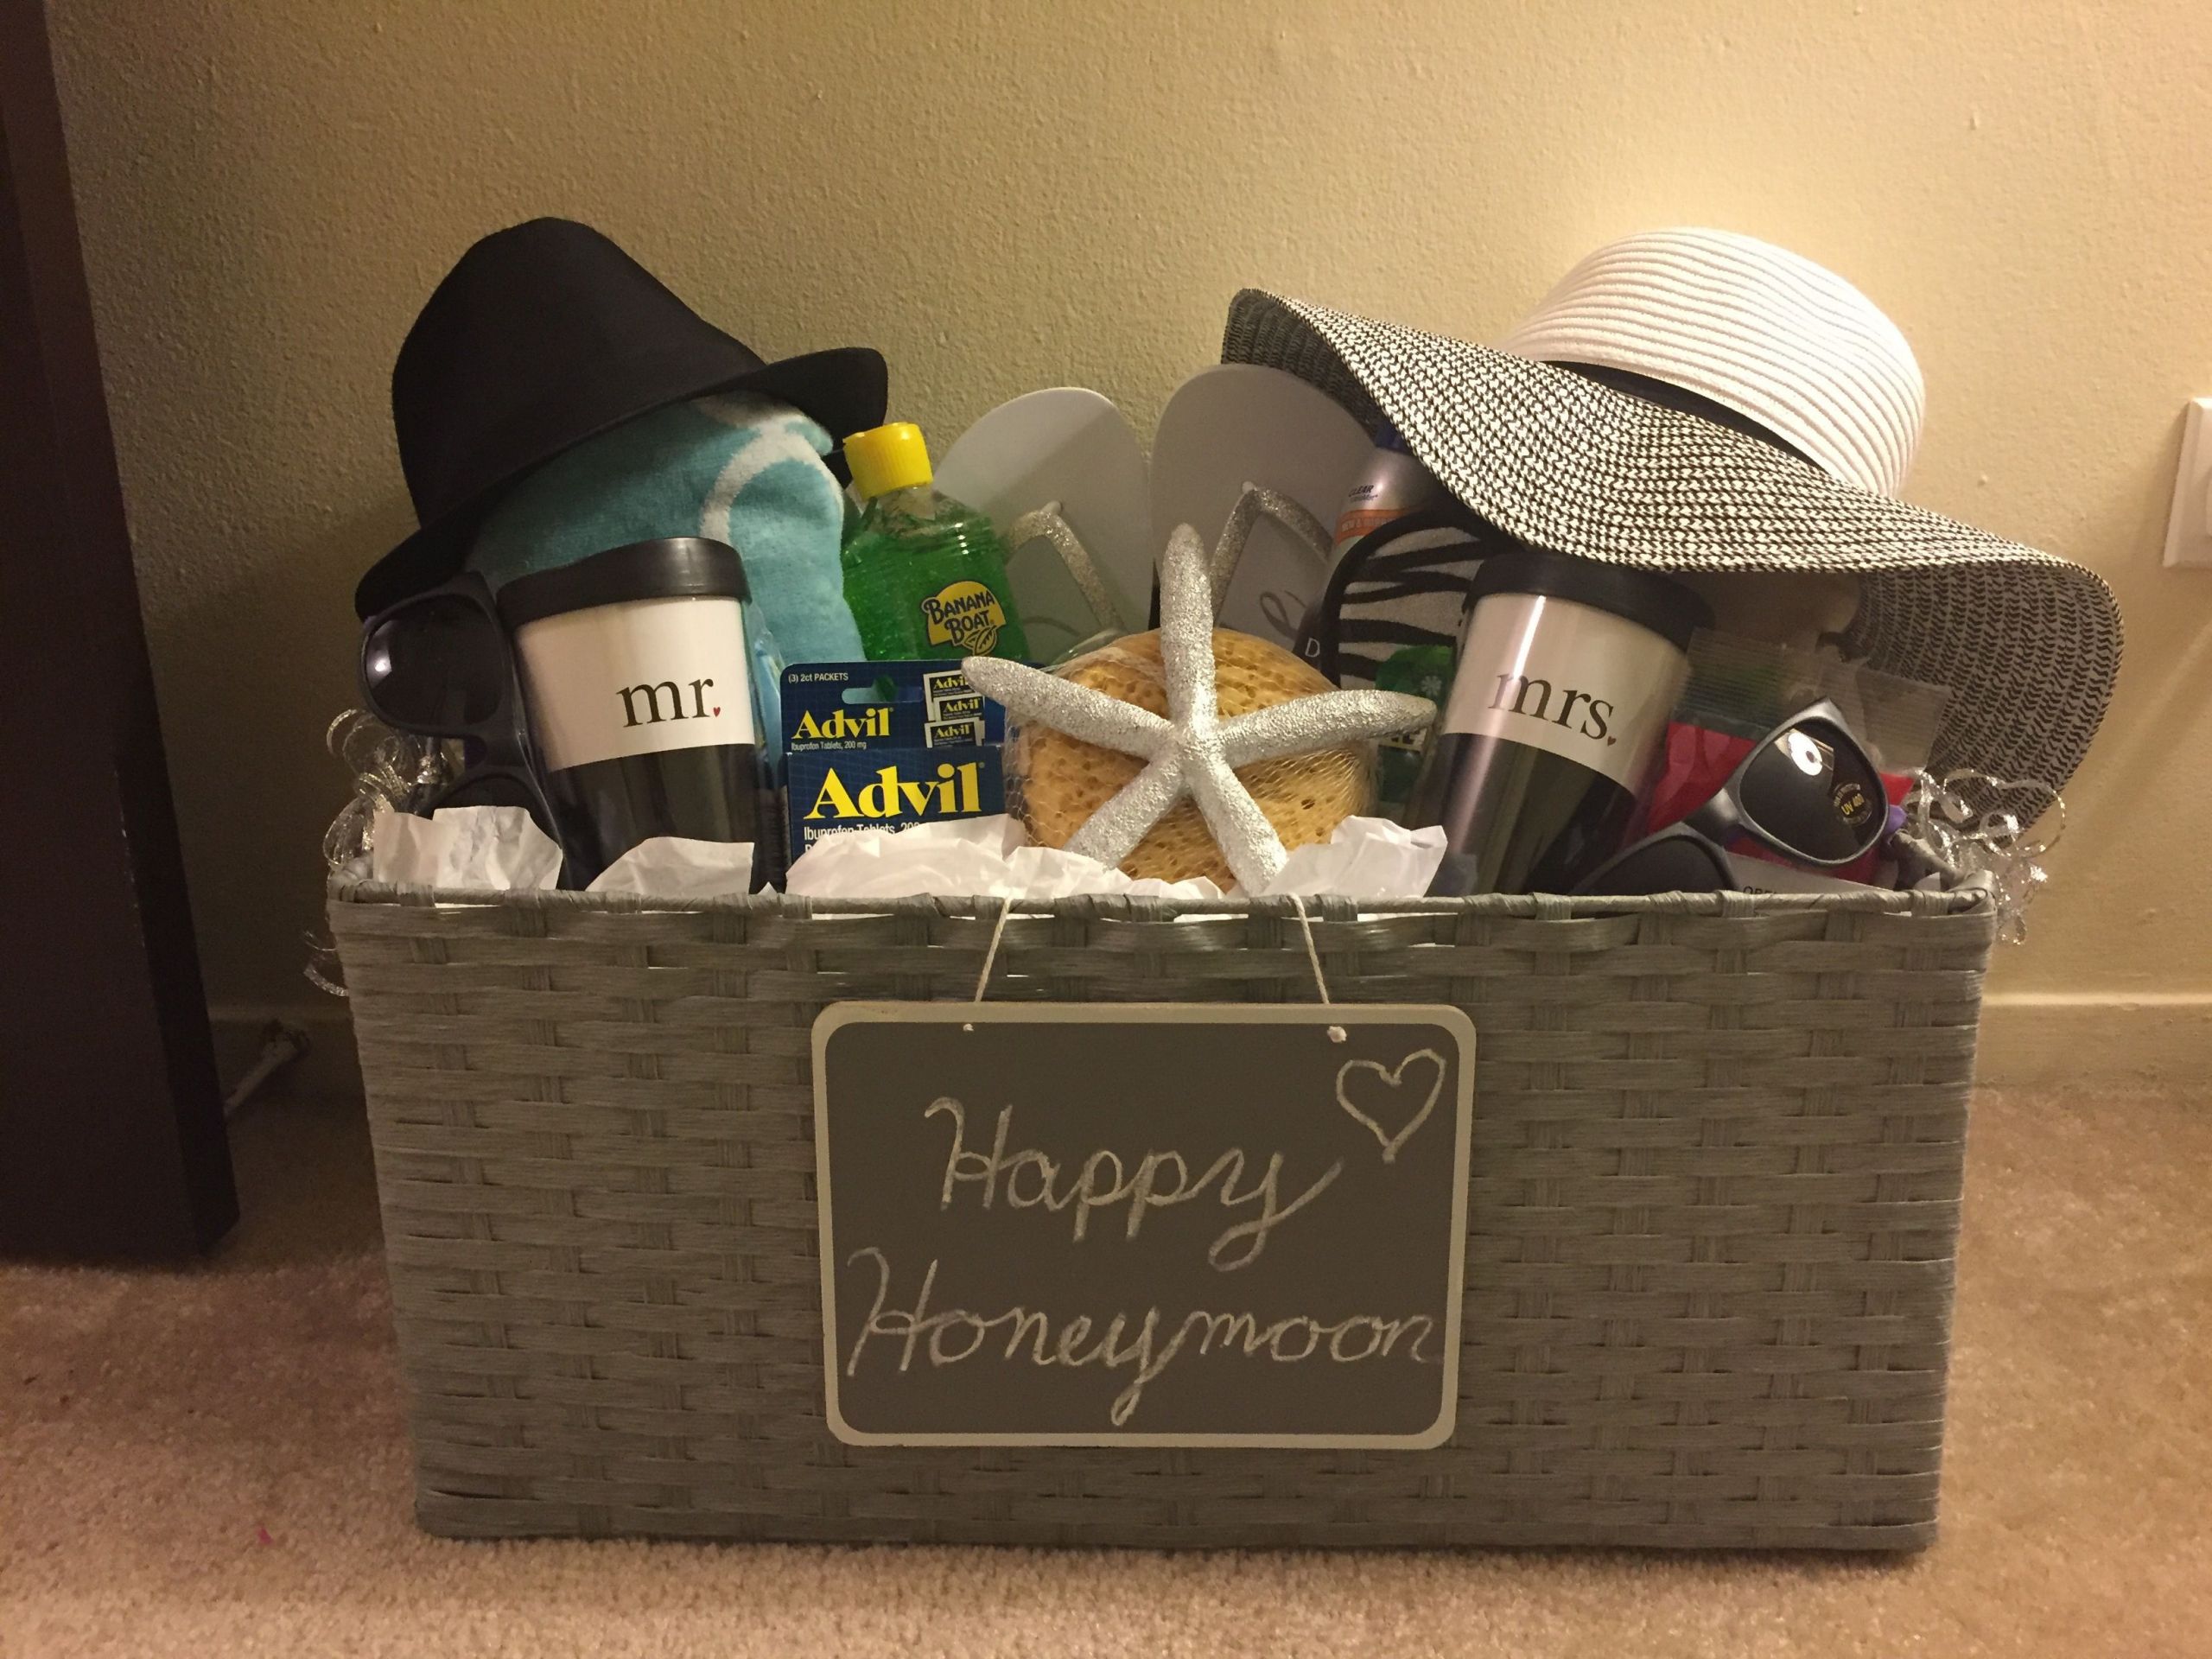 Wedding Gift Basket Ideas For Bride And Groom
 Get all the bridemaids to make a basket to give the bride